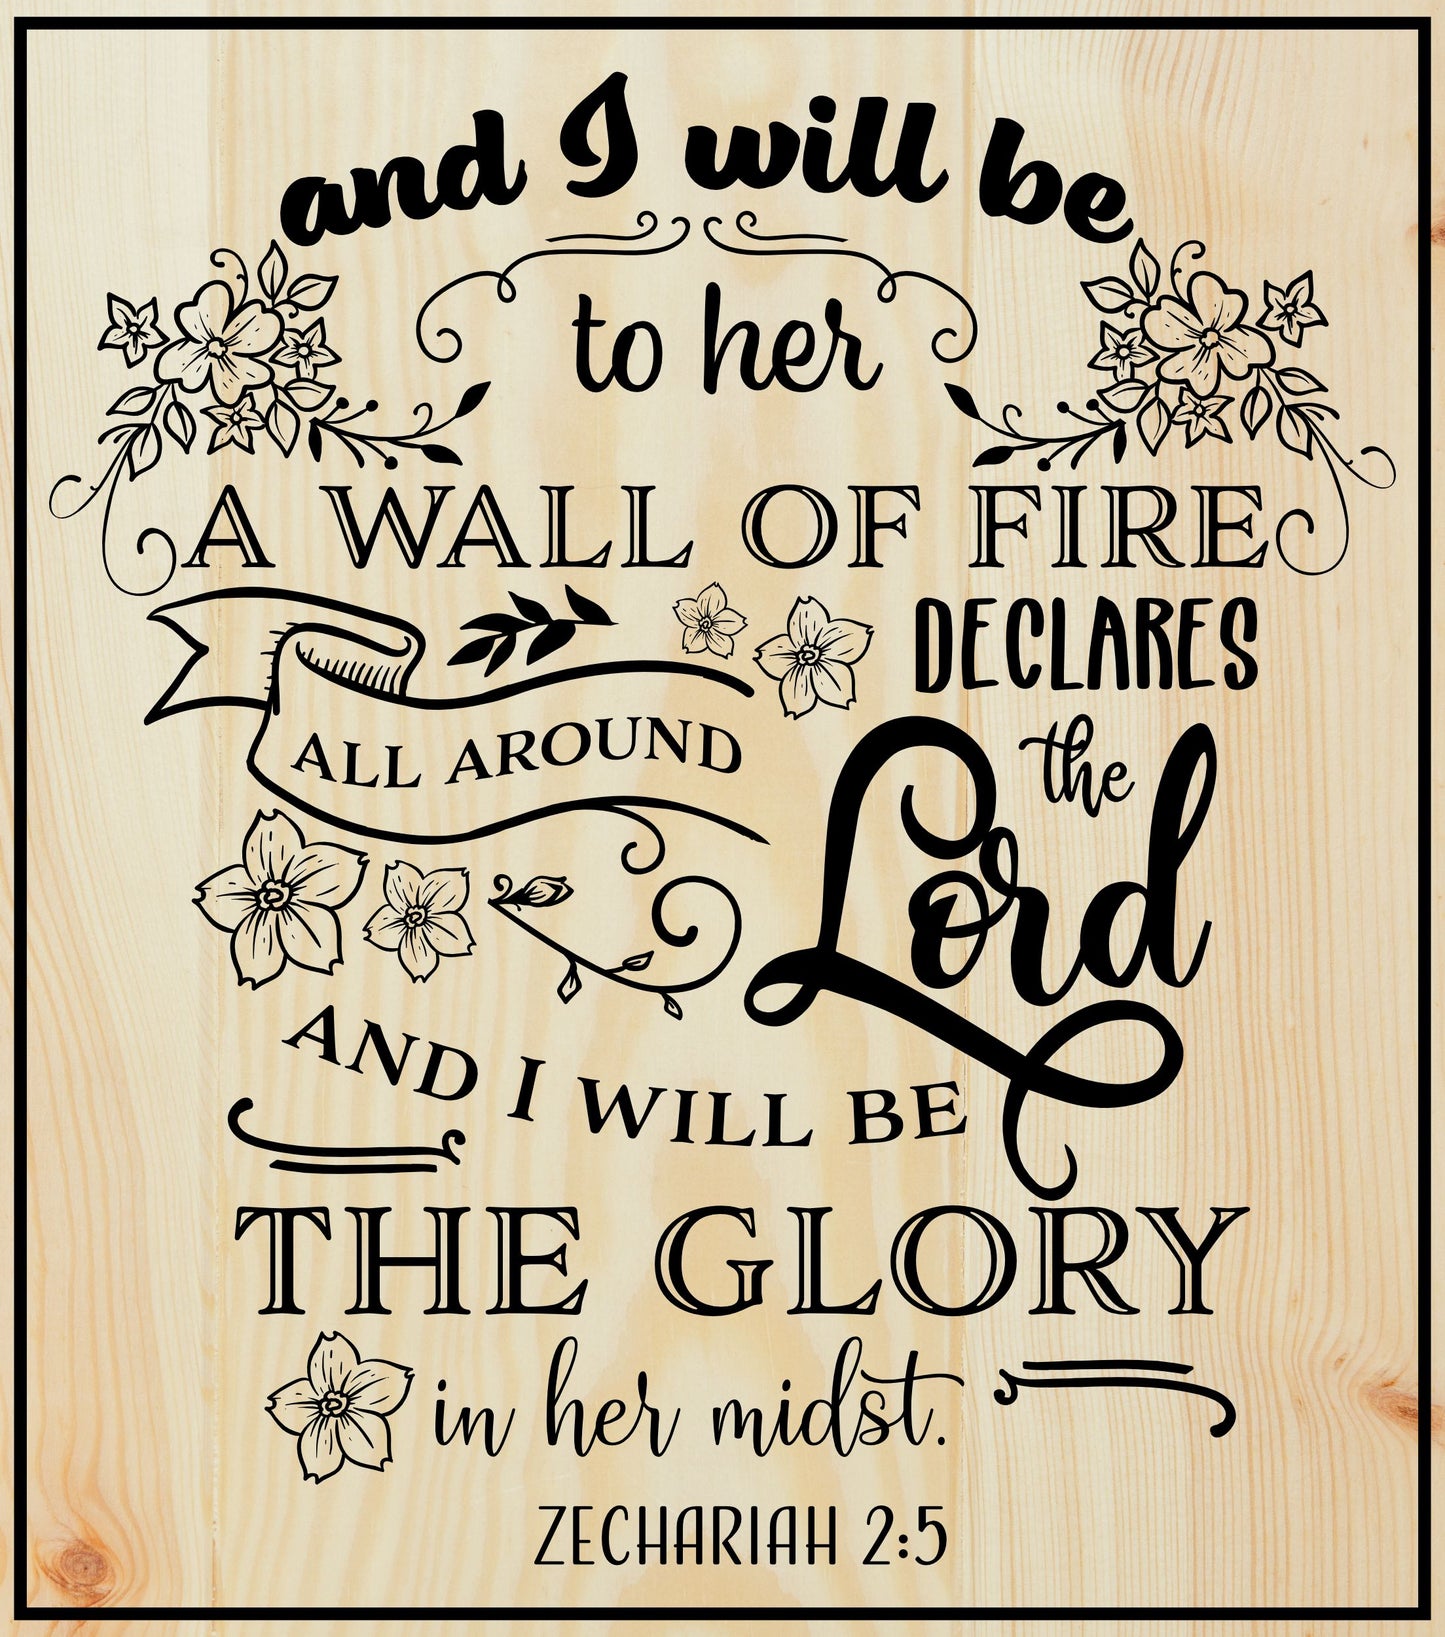 Zechariah 2:5 and I will be to her Engraved Wood Sign